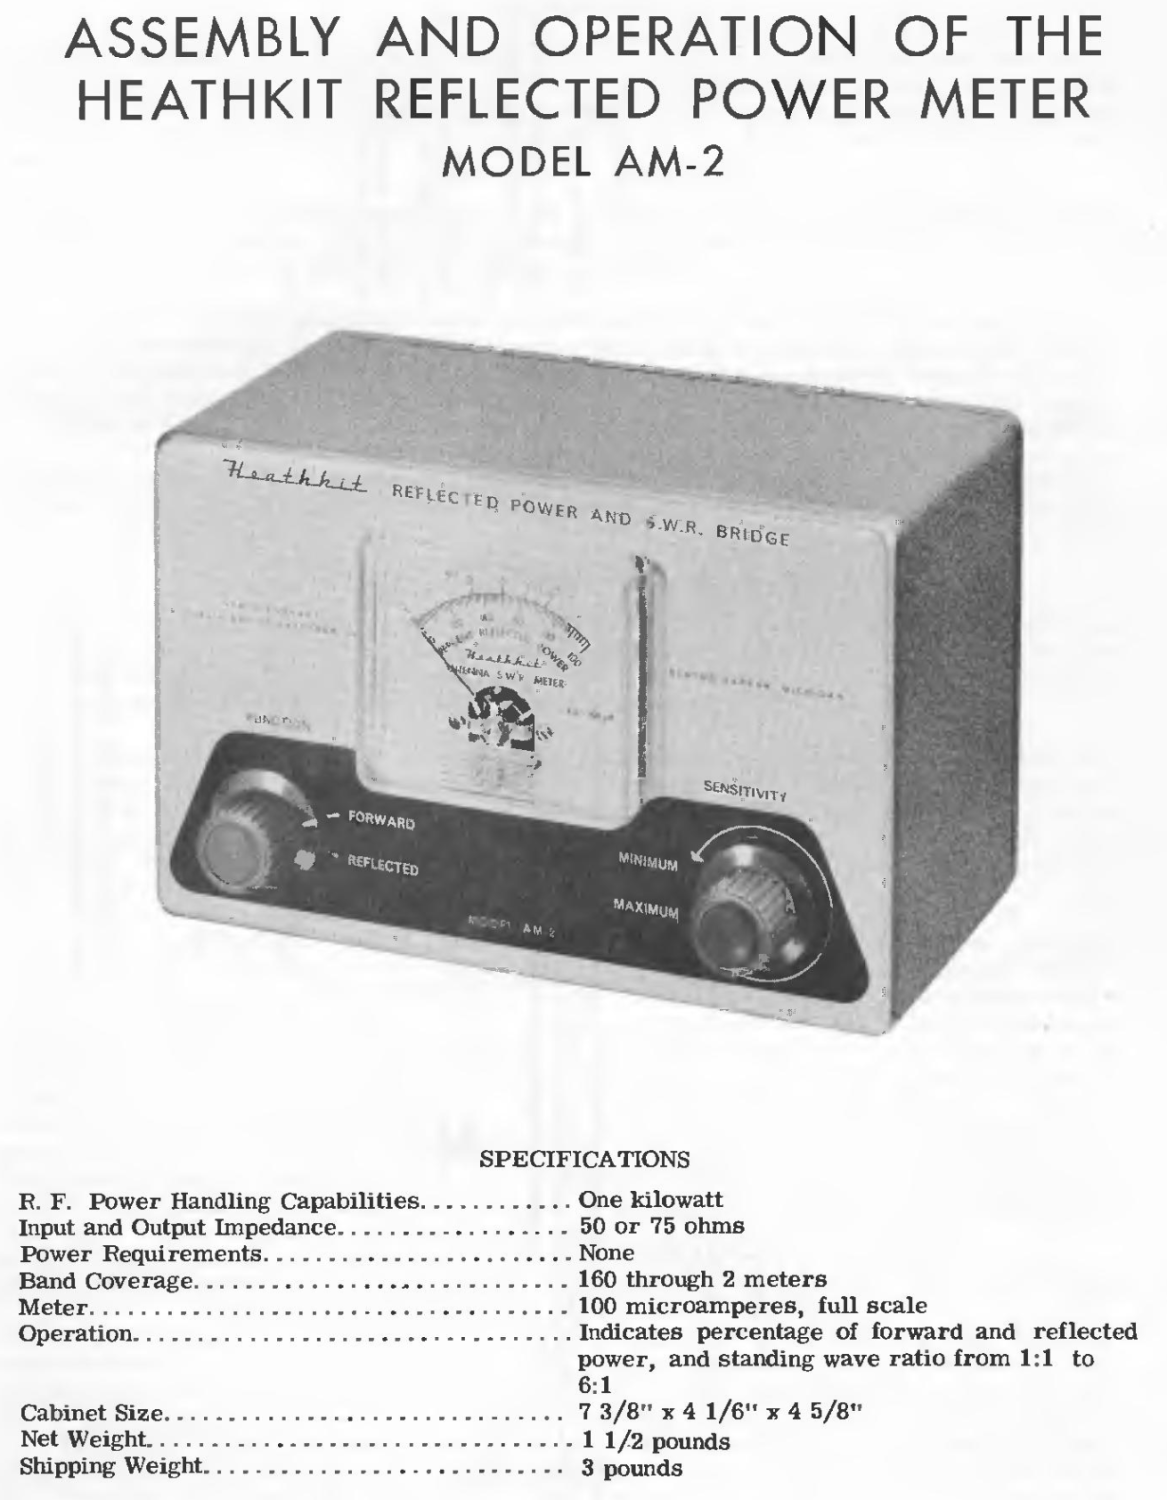 Heathkit AM-2 Reflected Power Meter - Assembly Instructions